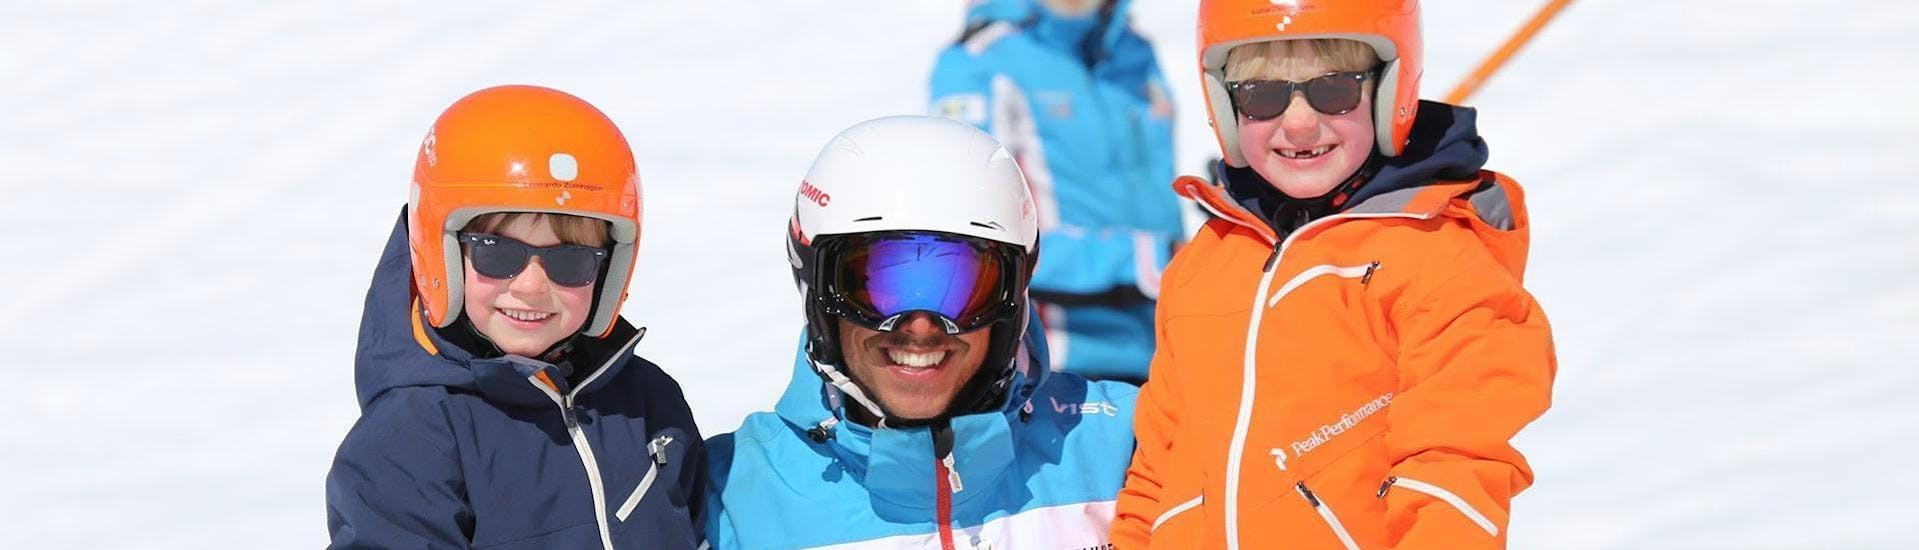 Two children and their ski instructor are smiling at the camera as they enjoy their Private Ski Lessons for Kids - All Levels in the ski resort of Ischgl.